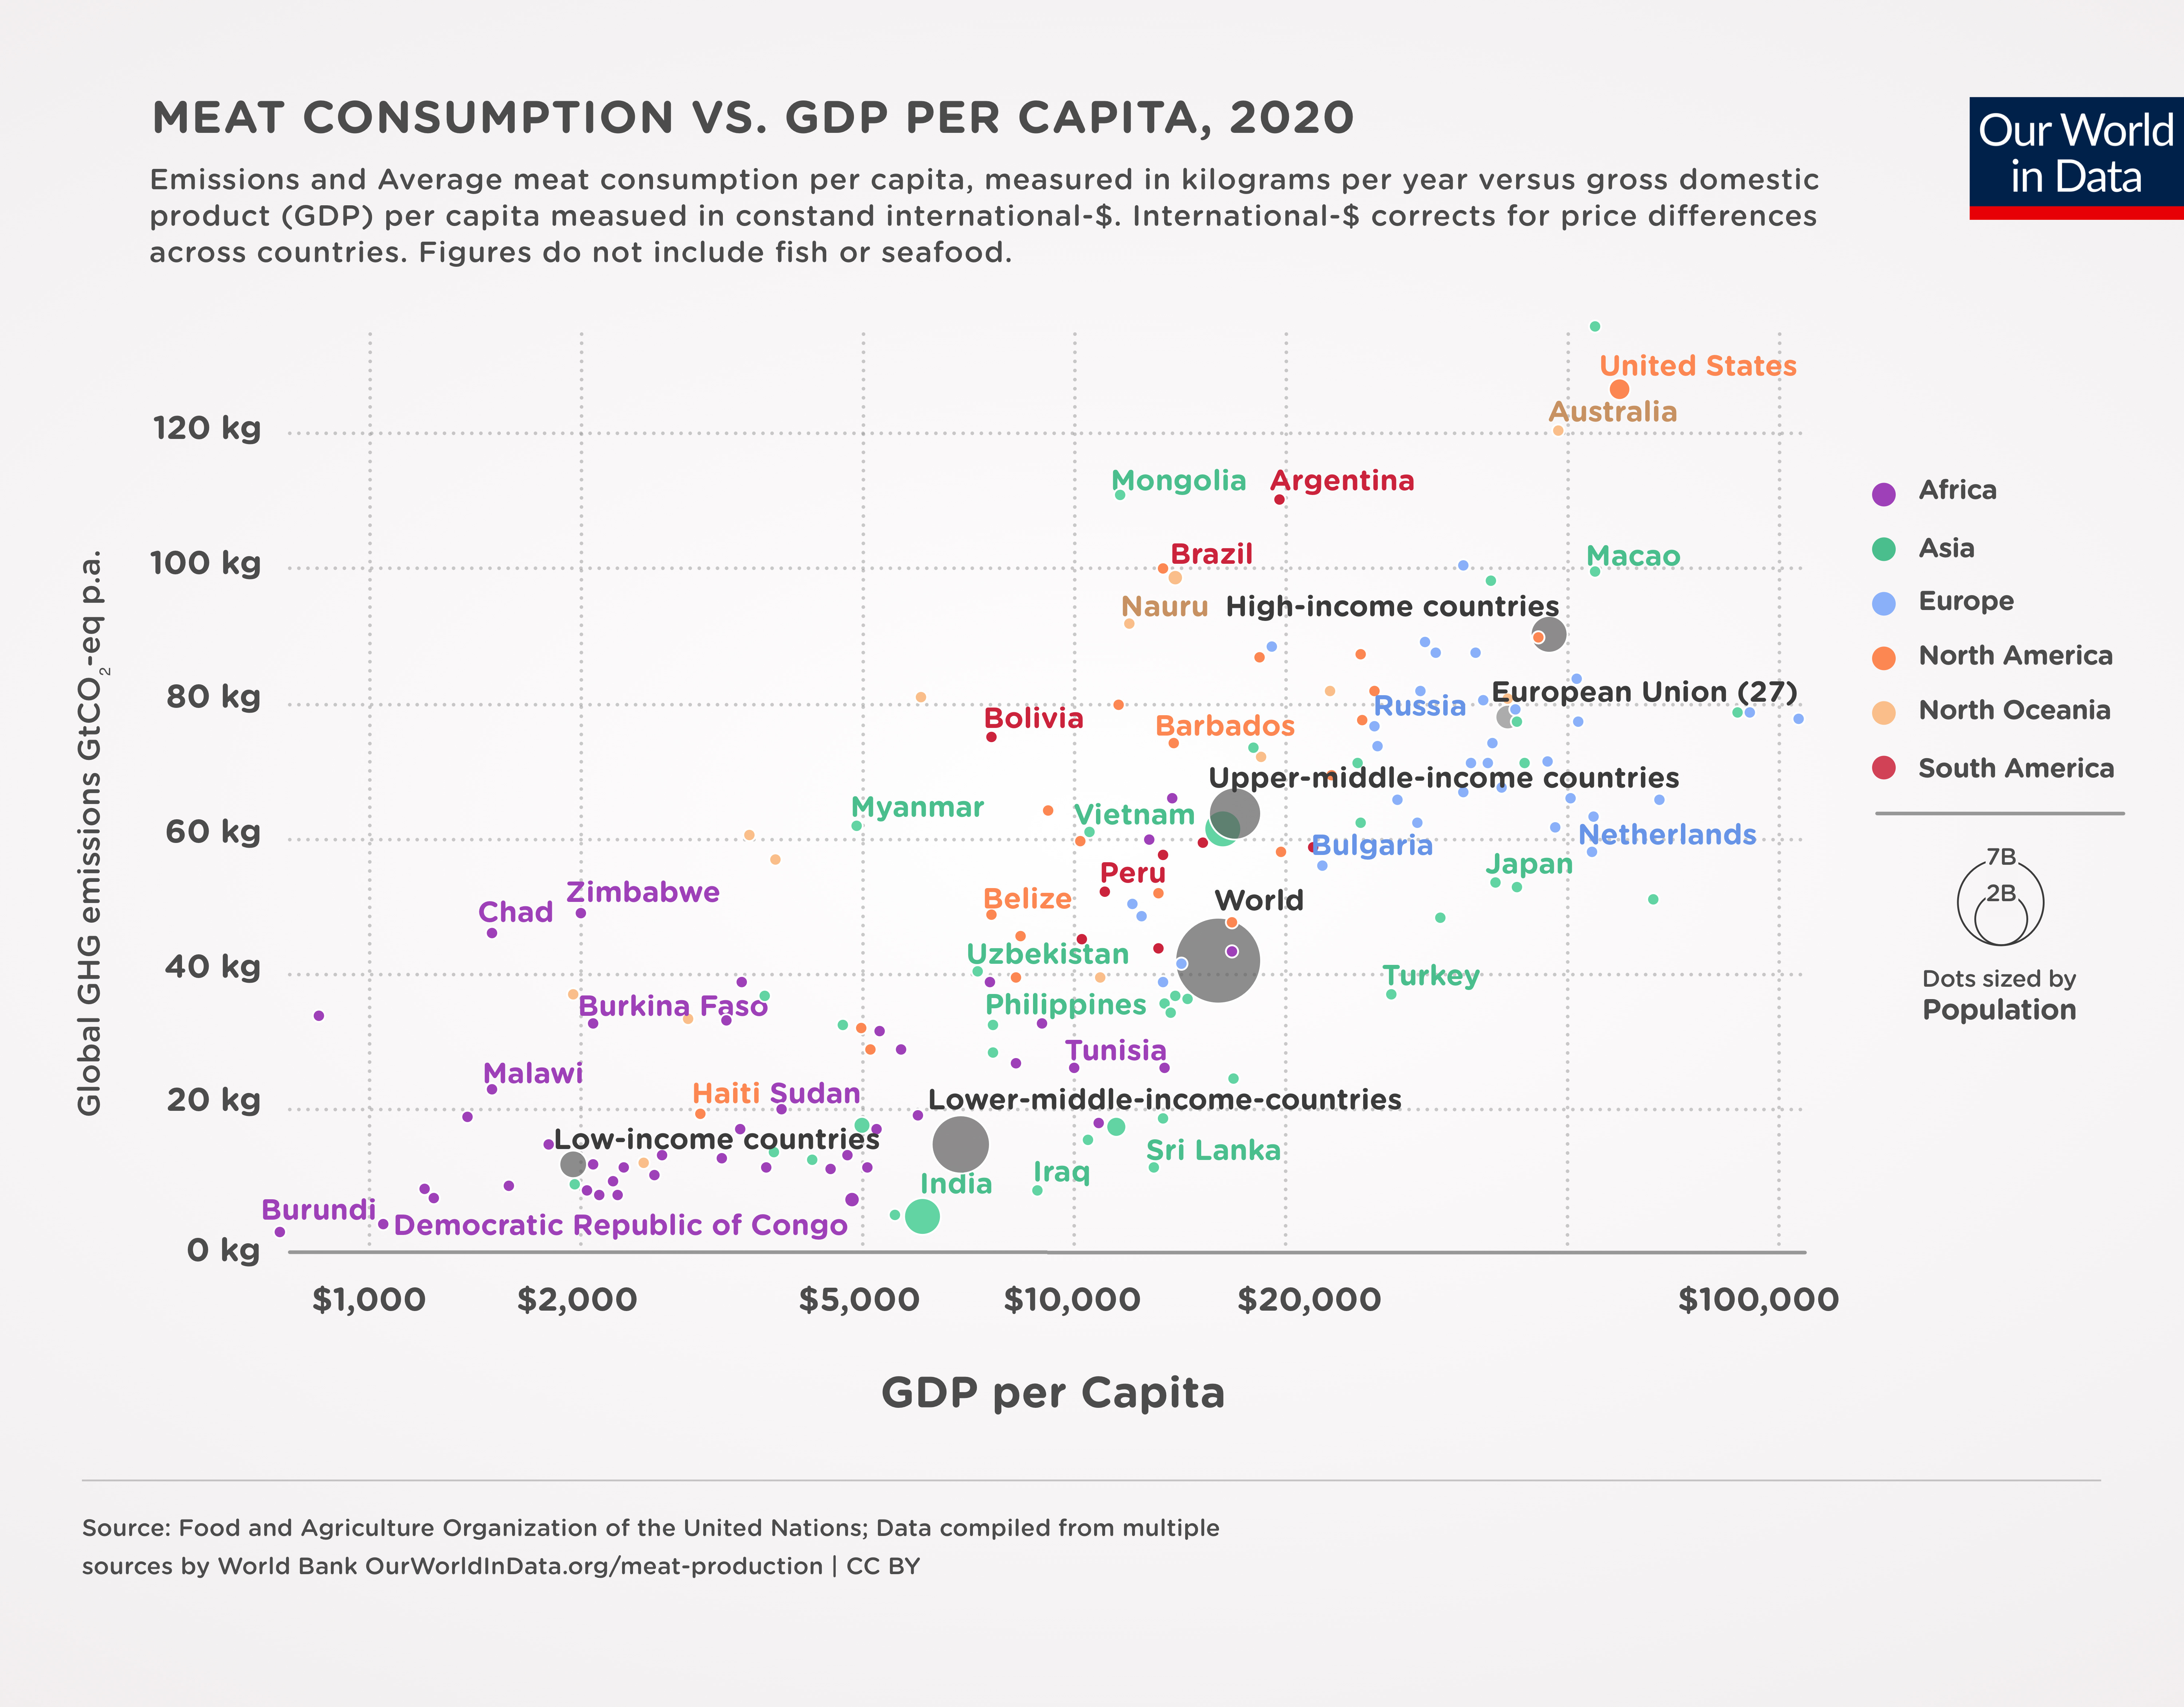 Our world in data chart: Countries and their meat consumption vs their gdp per capita.